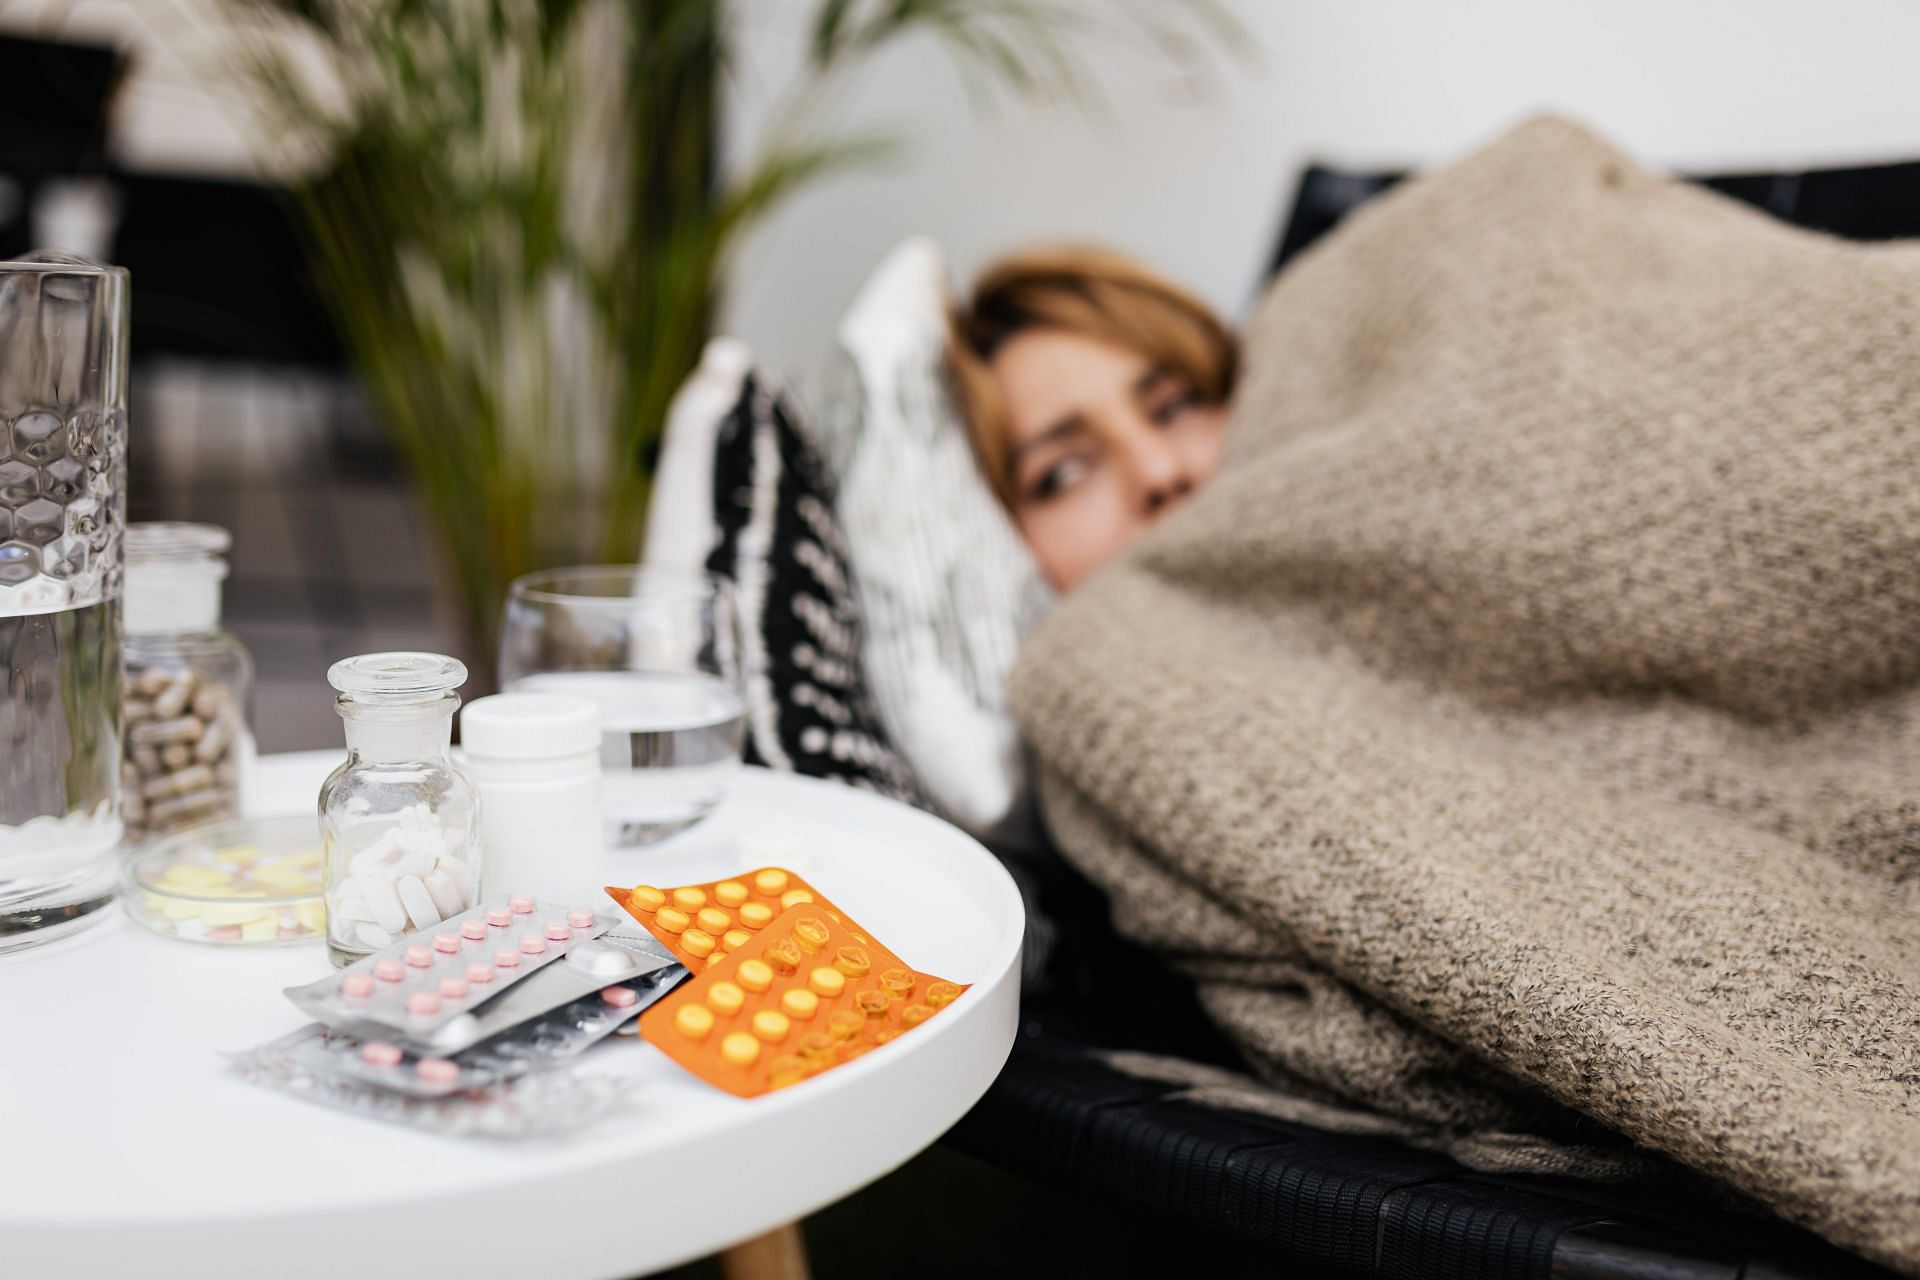 Resting when sick is important for protection against disease (Image sourced via Pexels / Photo by grabowska)